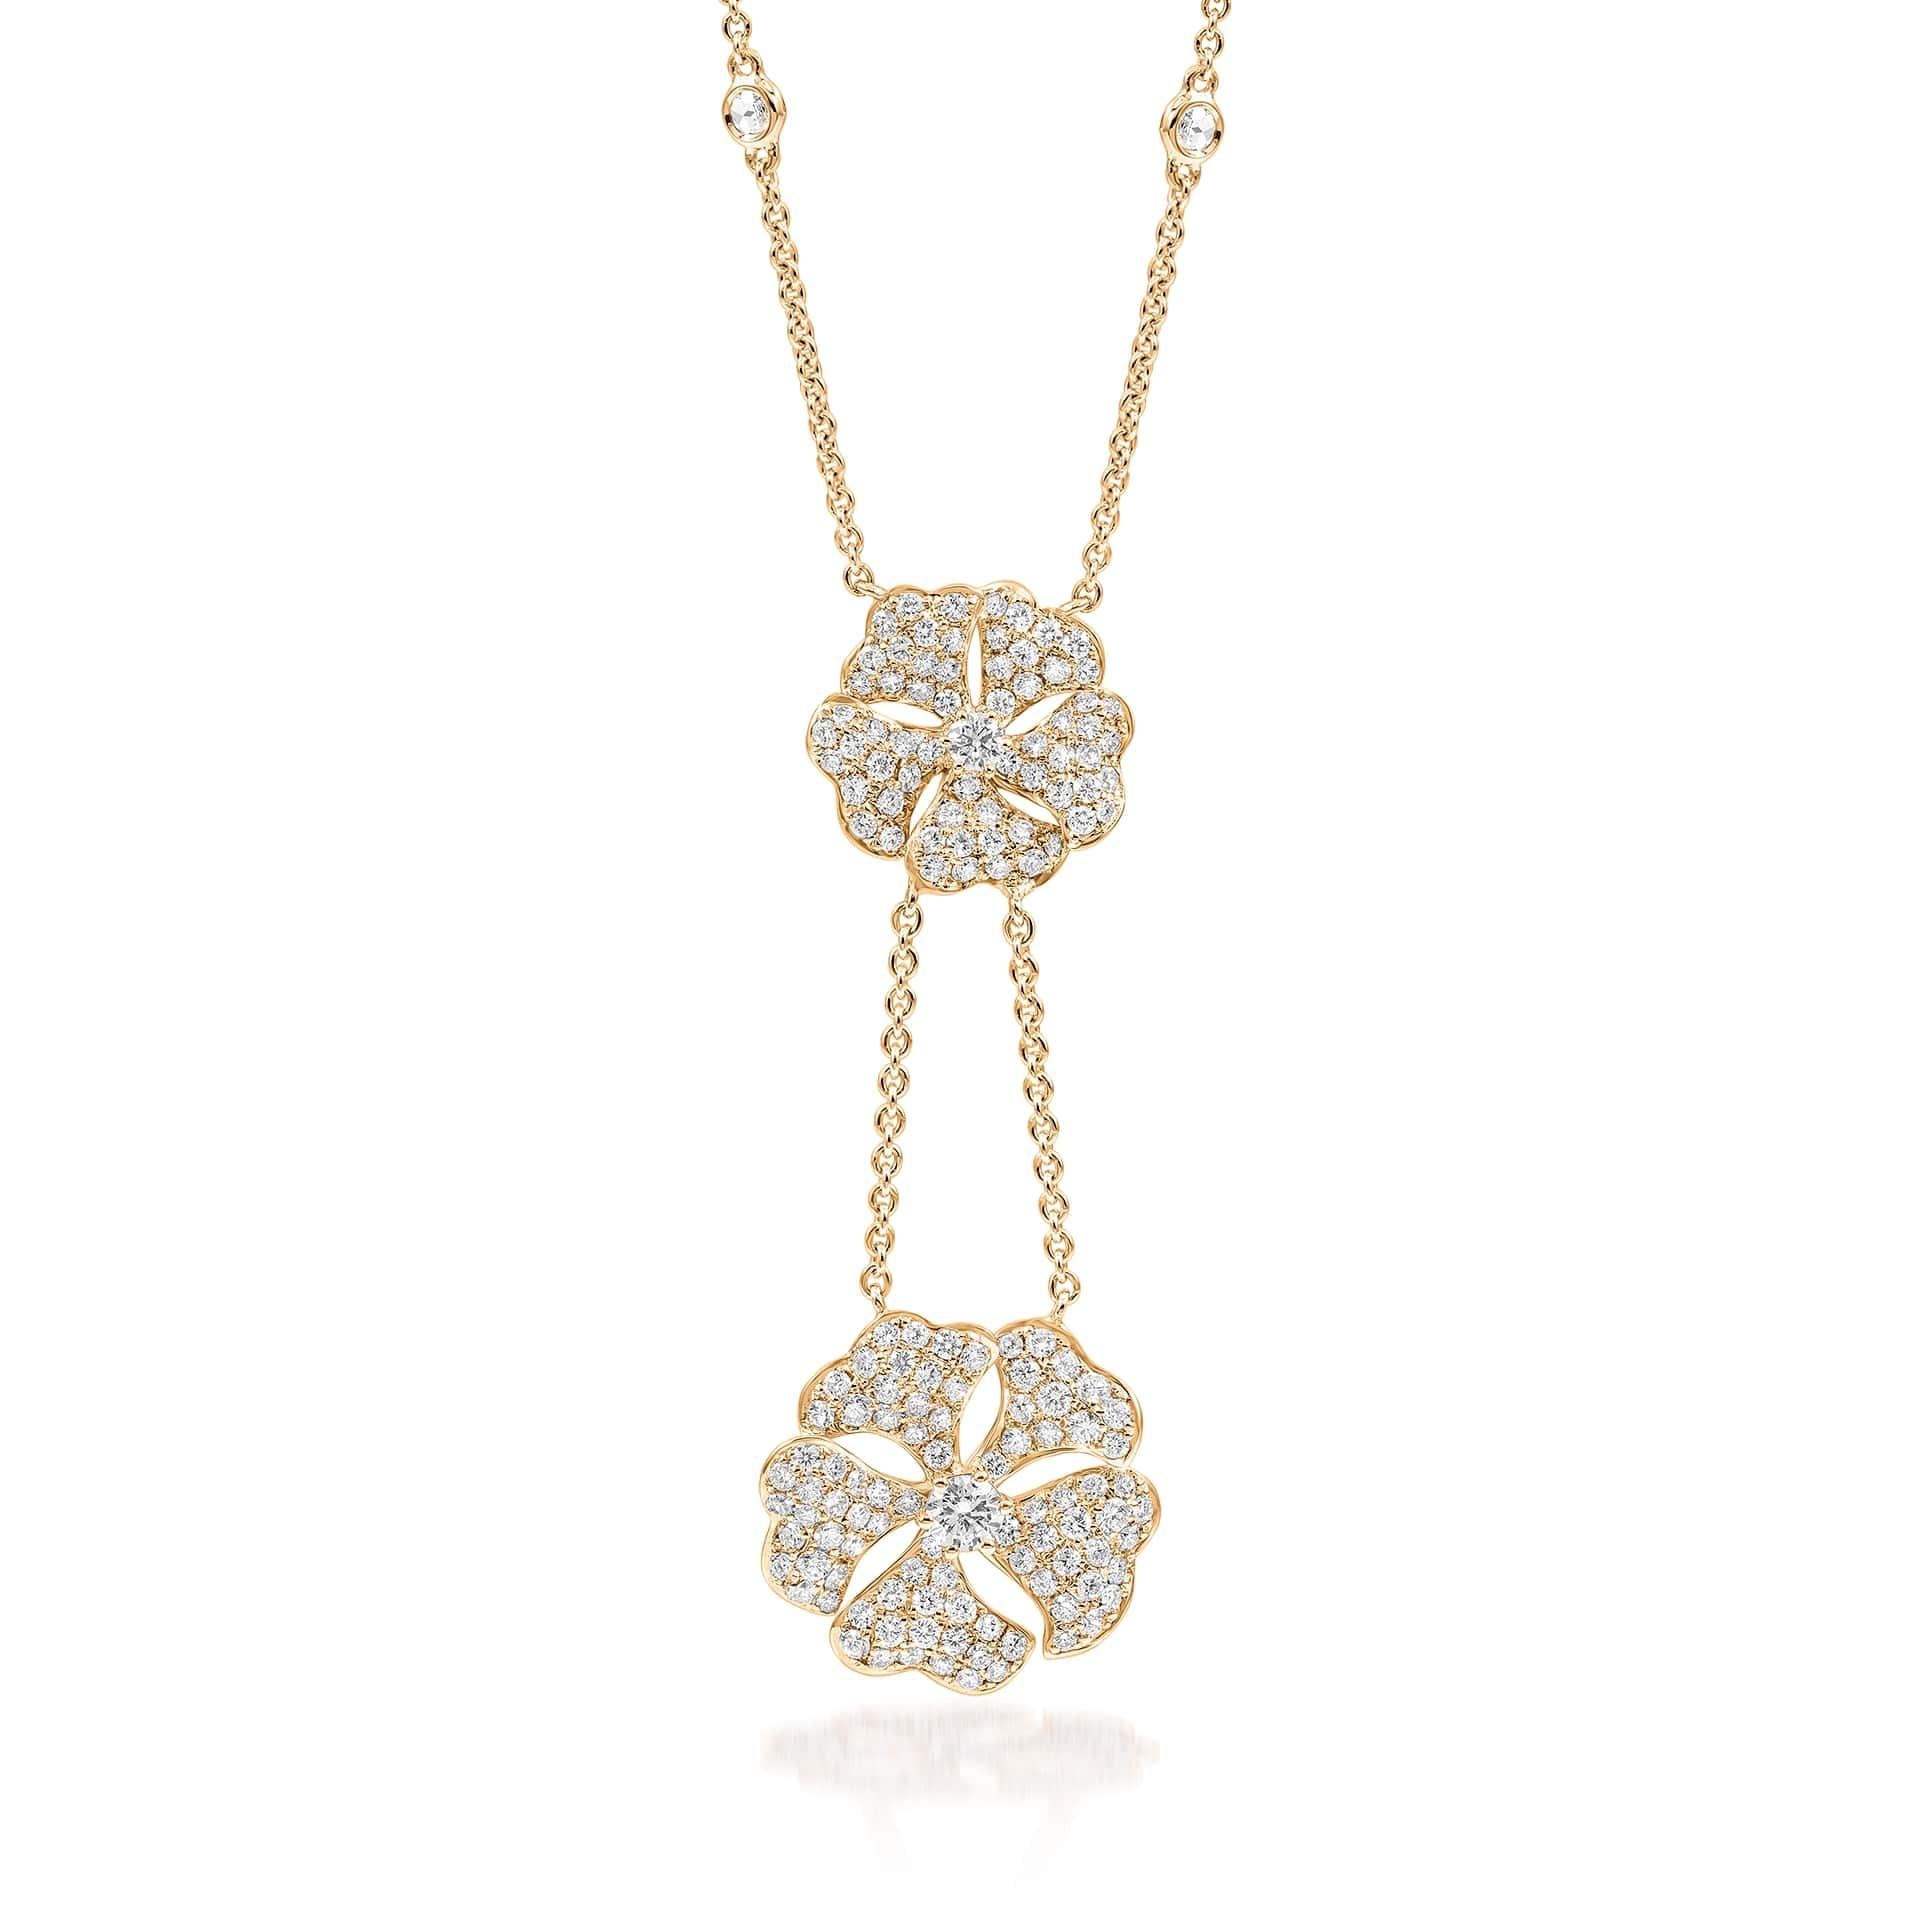 Bloom Diamond Drop Flower Necklace in 18K Yellow Gold

Inspired by the exquisite petals of the alpine cinquefoil flower, the Bloom collection combines the richness of diamonds and precious metals with the light versatility of this delicate,